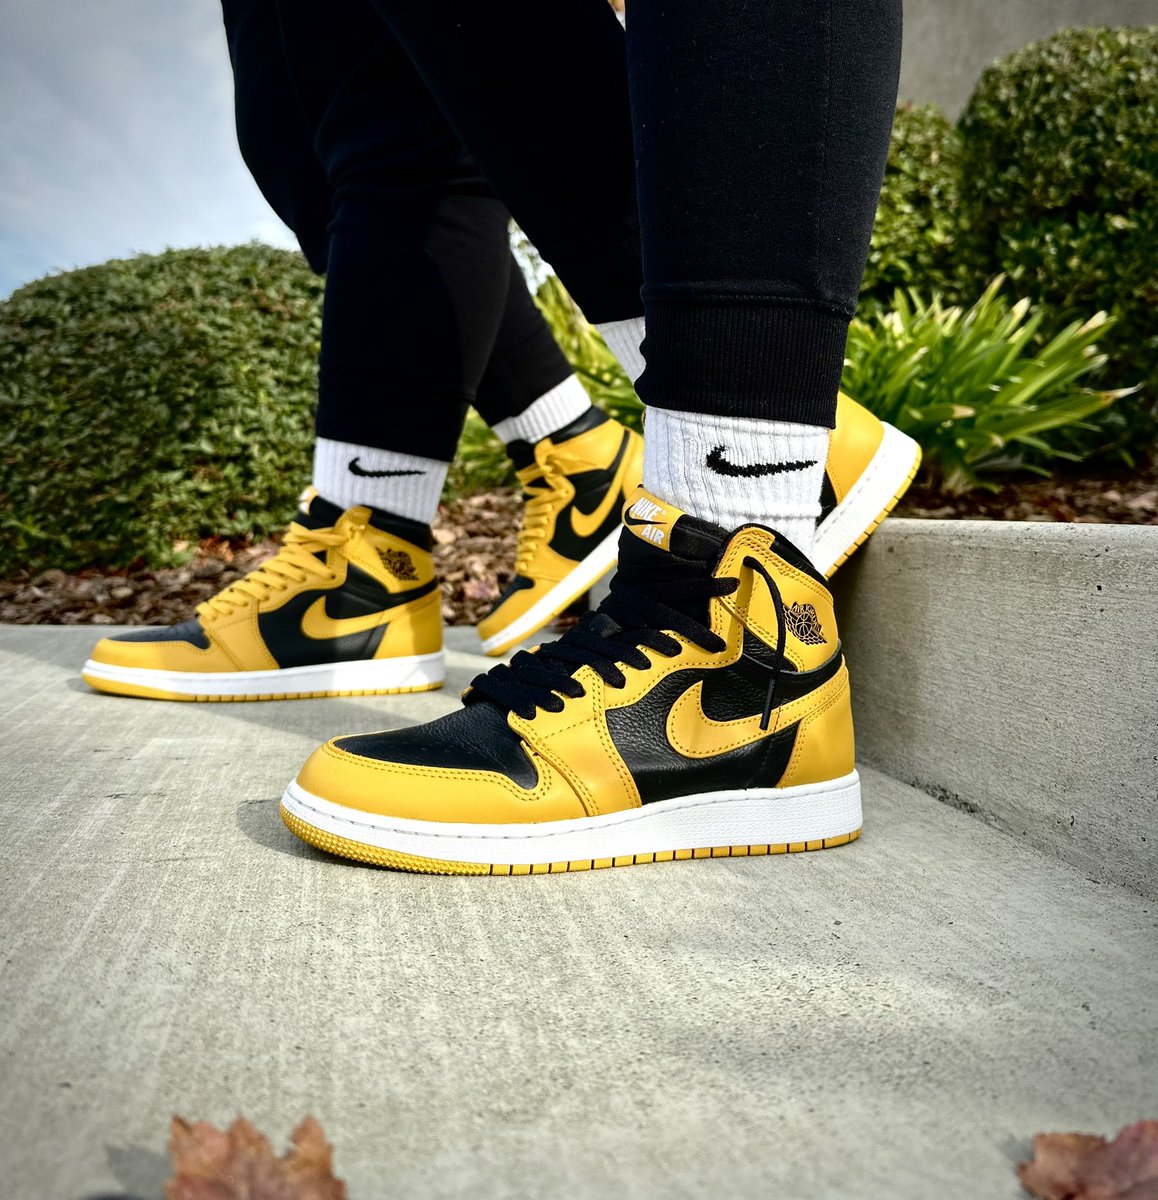 🐝🐝🐝 Black and Yellow.. sometimes you gotta let her be the Show stopper 😂🙌🏾🙌🏾🫶🏾🫶🏾 #weekofjordan1high #stilllaceddifferently #snkrskliveheatingup
#solecollectors #snkrskickcheck #sneakerhead #sneakerfreakerfam #MillerApproved #dubbsteppin #sneakerwifey #snkrliveheatingup